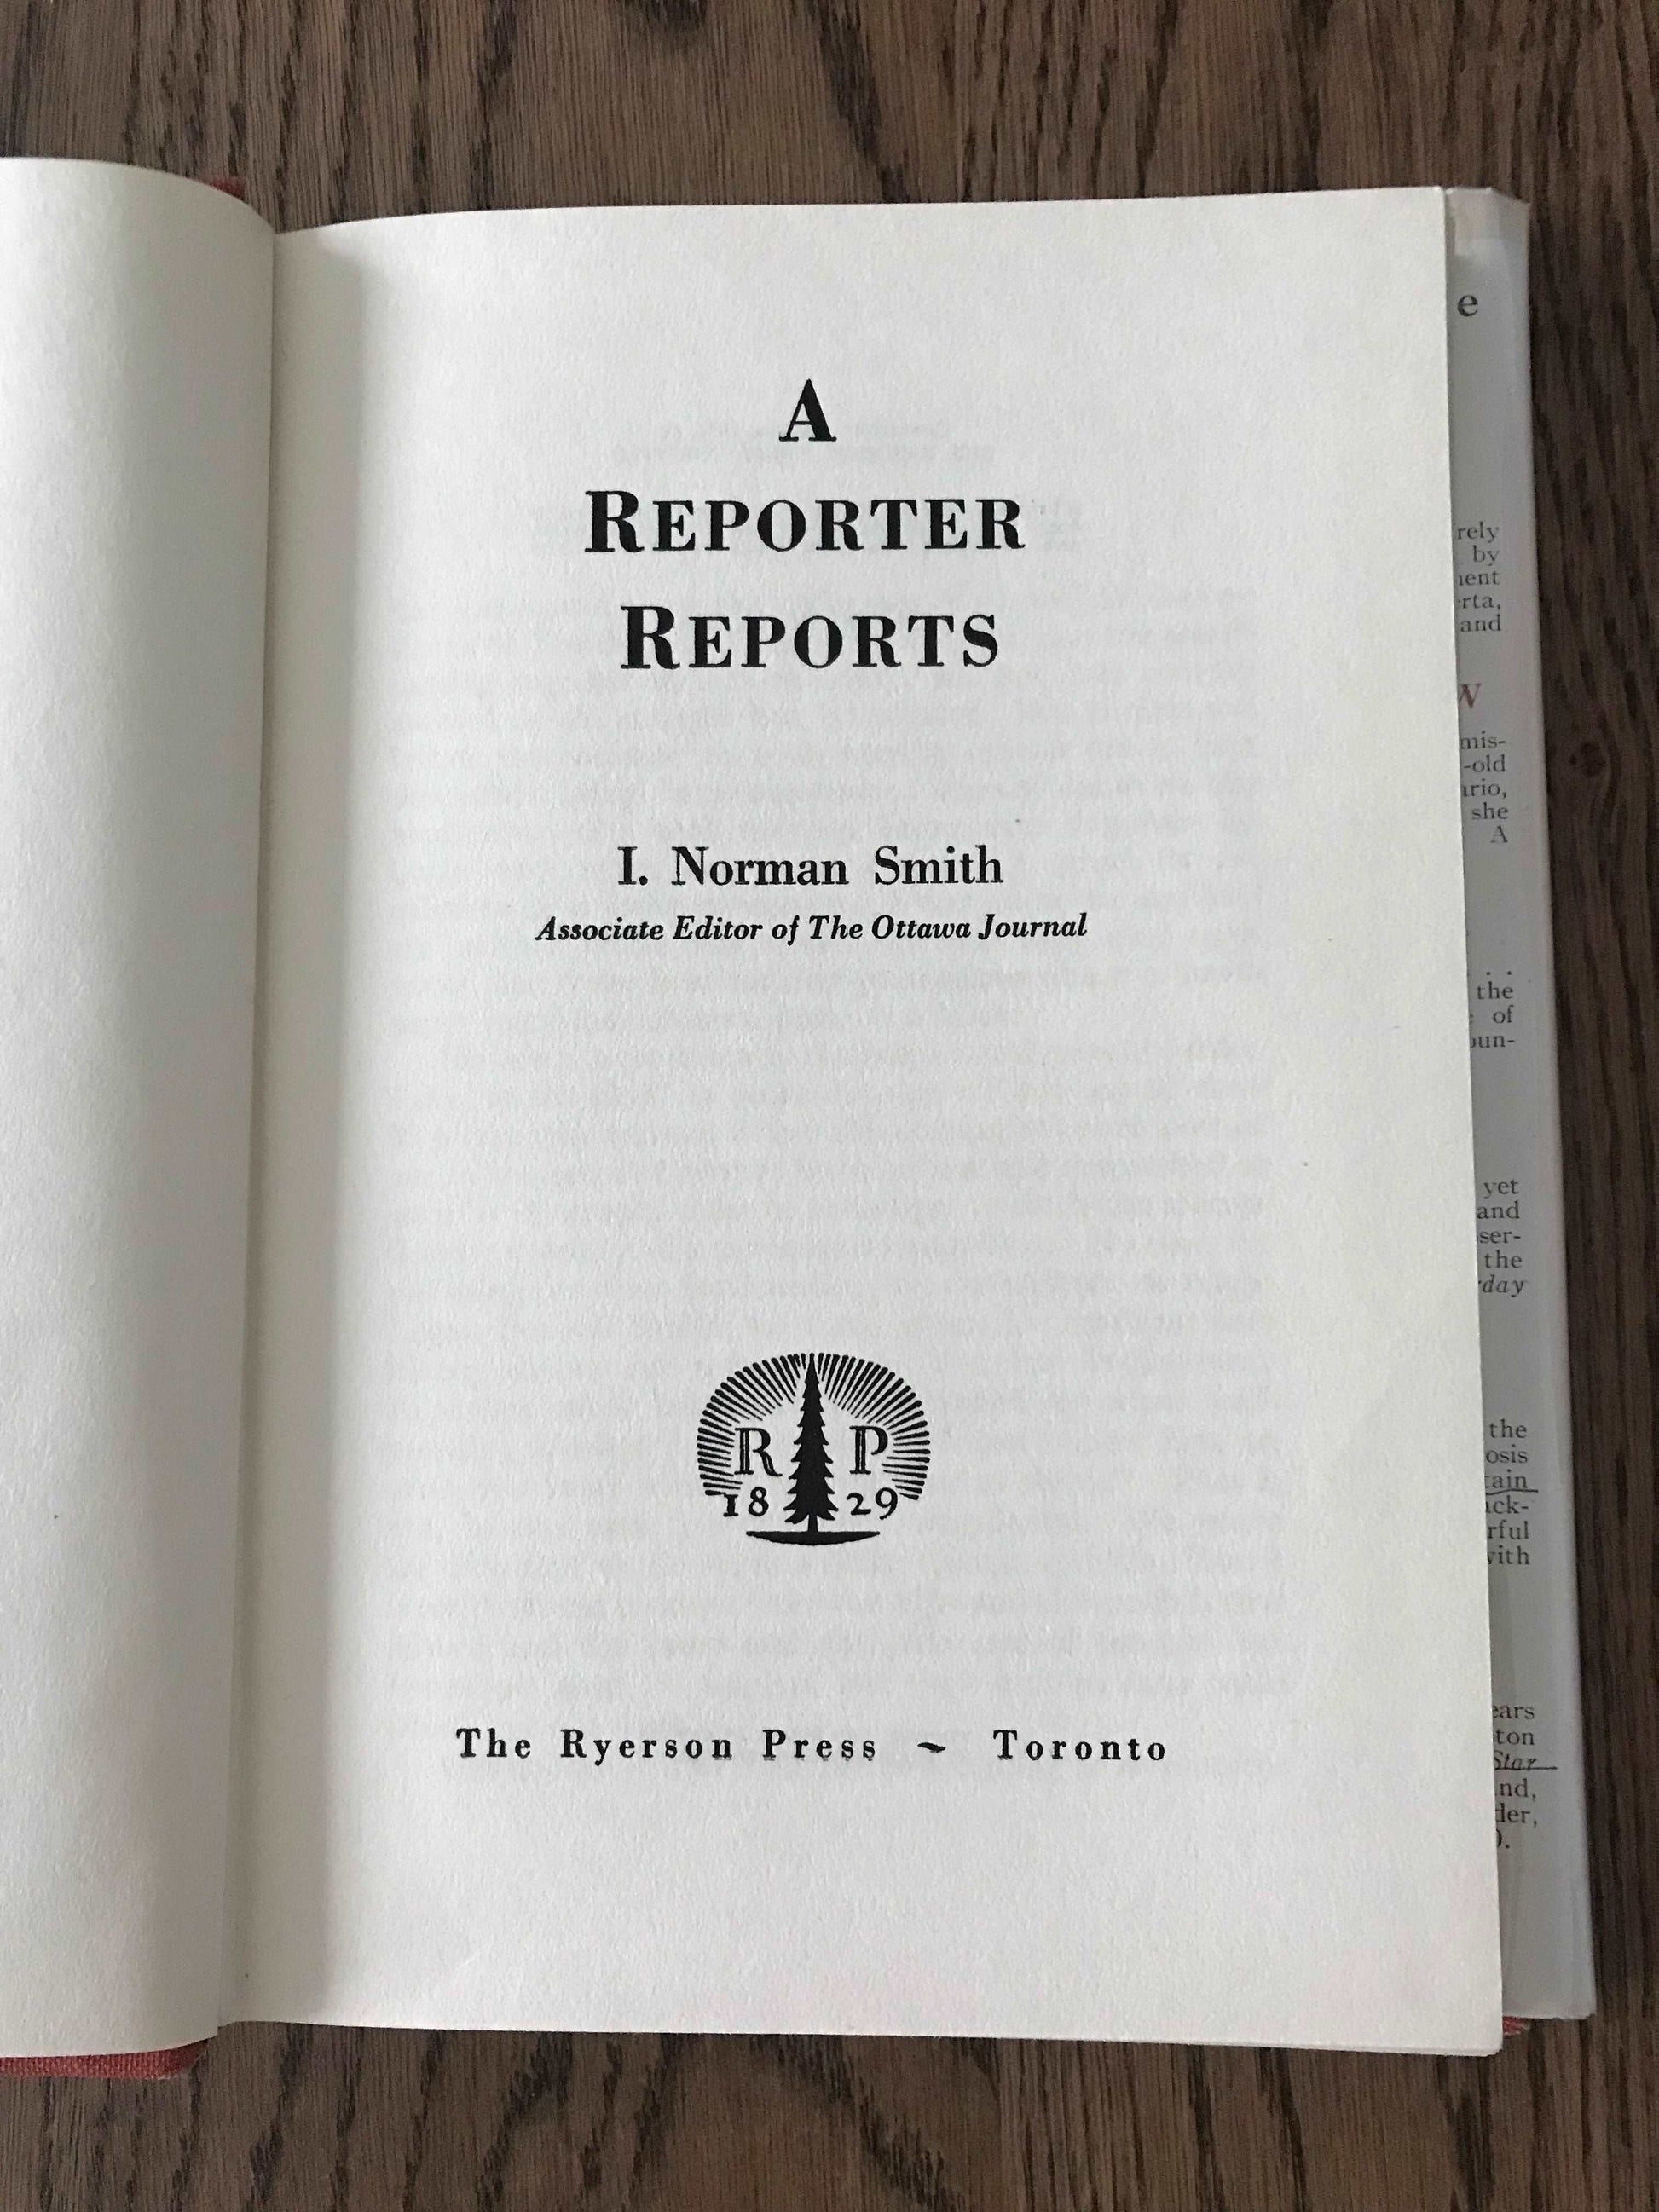 A REPORTER REPORTS - BY I. NORMAN SMITH BooksCardsNBikes